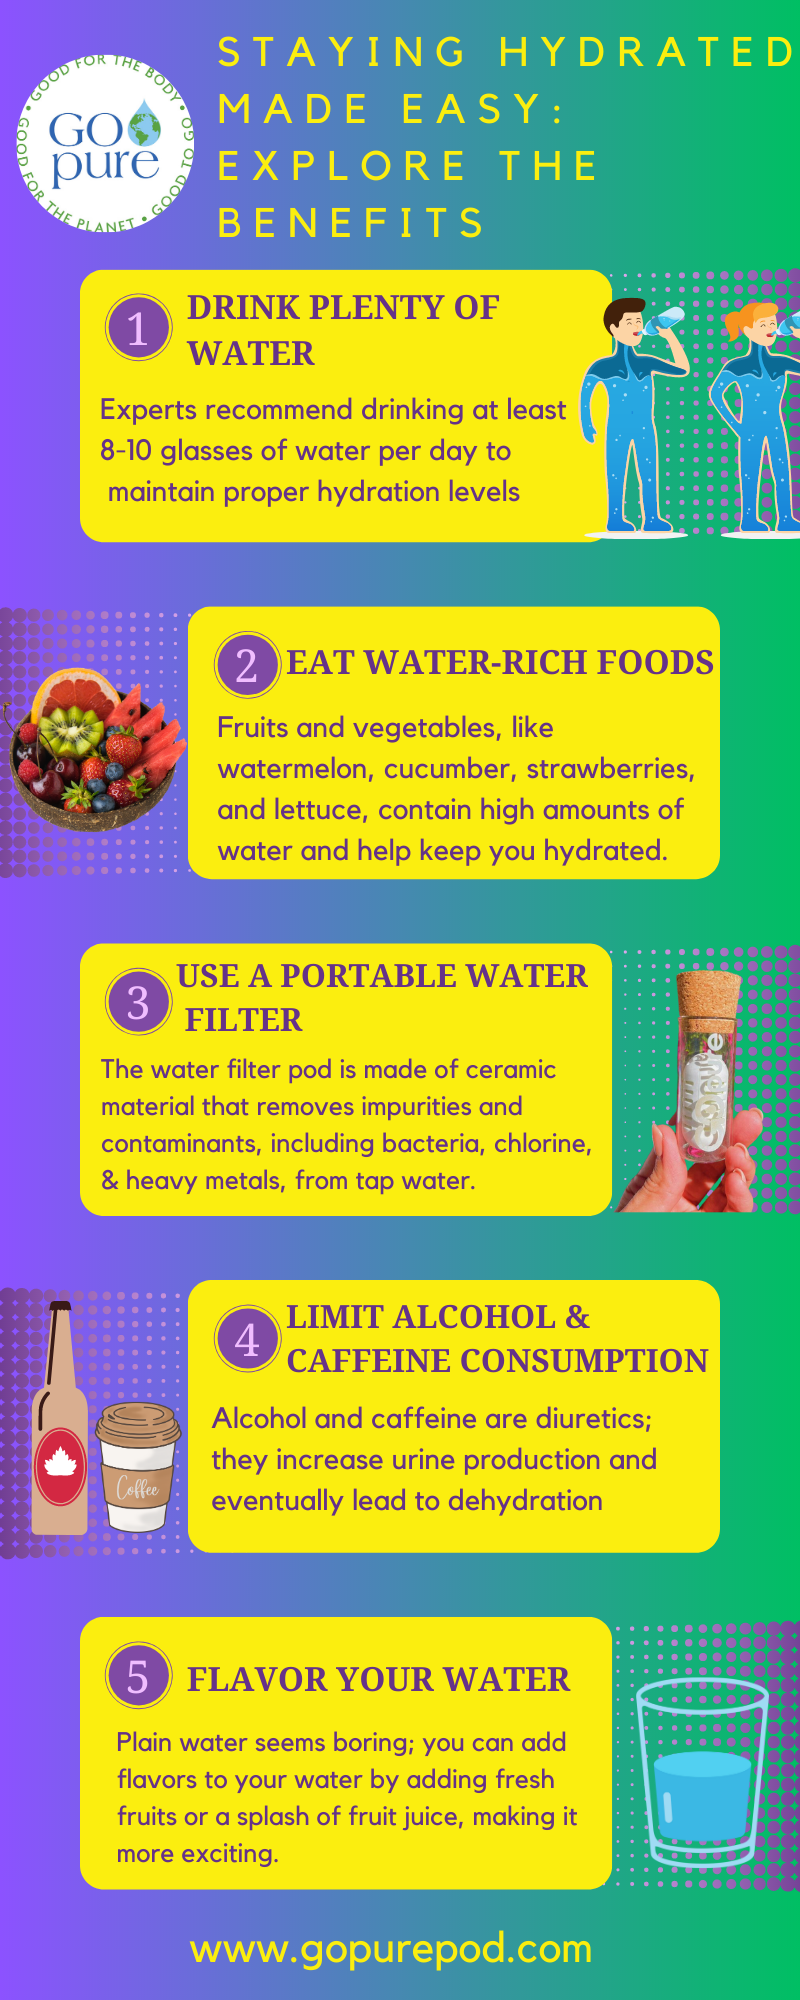 Staying Hydrated Made Easy: Explore the Benefits